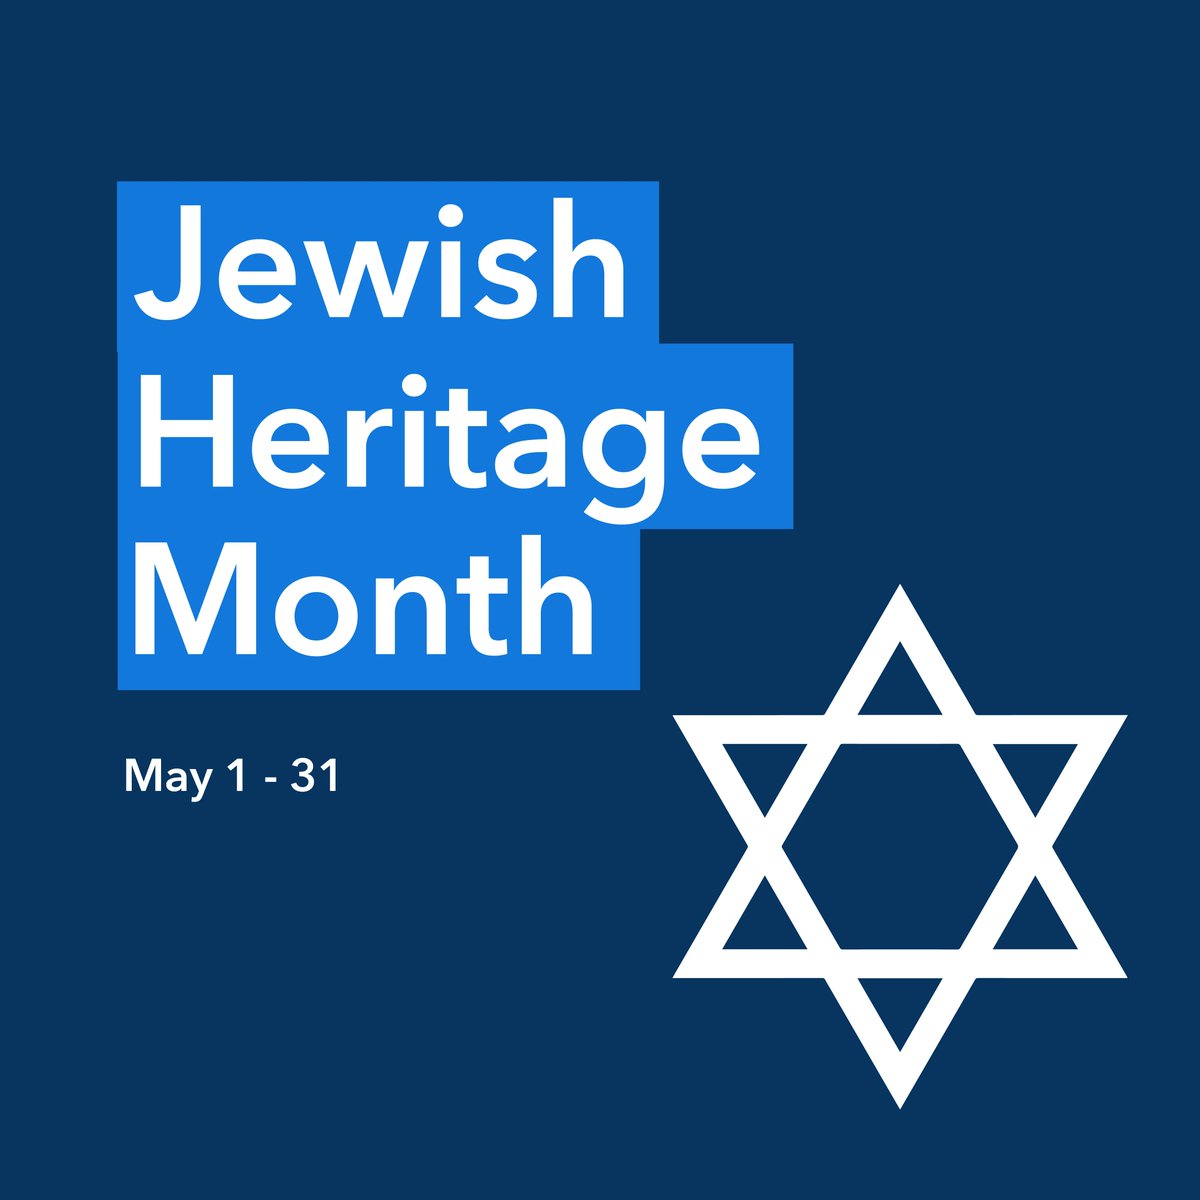 Happy Jewish Heritage Month! 

This month is a time to celebrate and recognize Jewish culture, faith, history and the immense contributions the communities have made to the social, political and economic fabric across Canada. #JewishHeritageMonth #JewishCommunities #JewishHistory